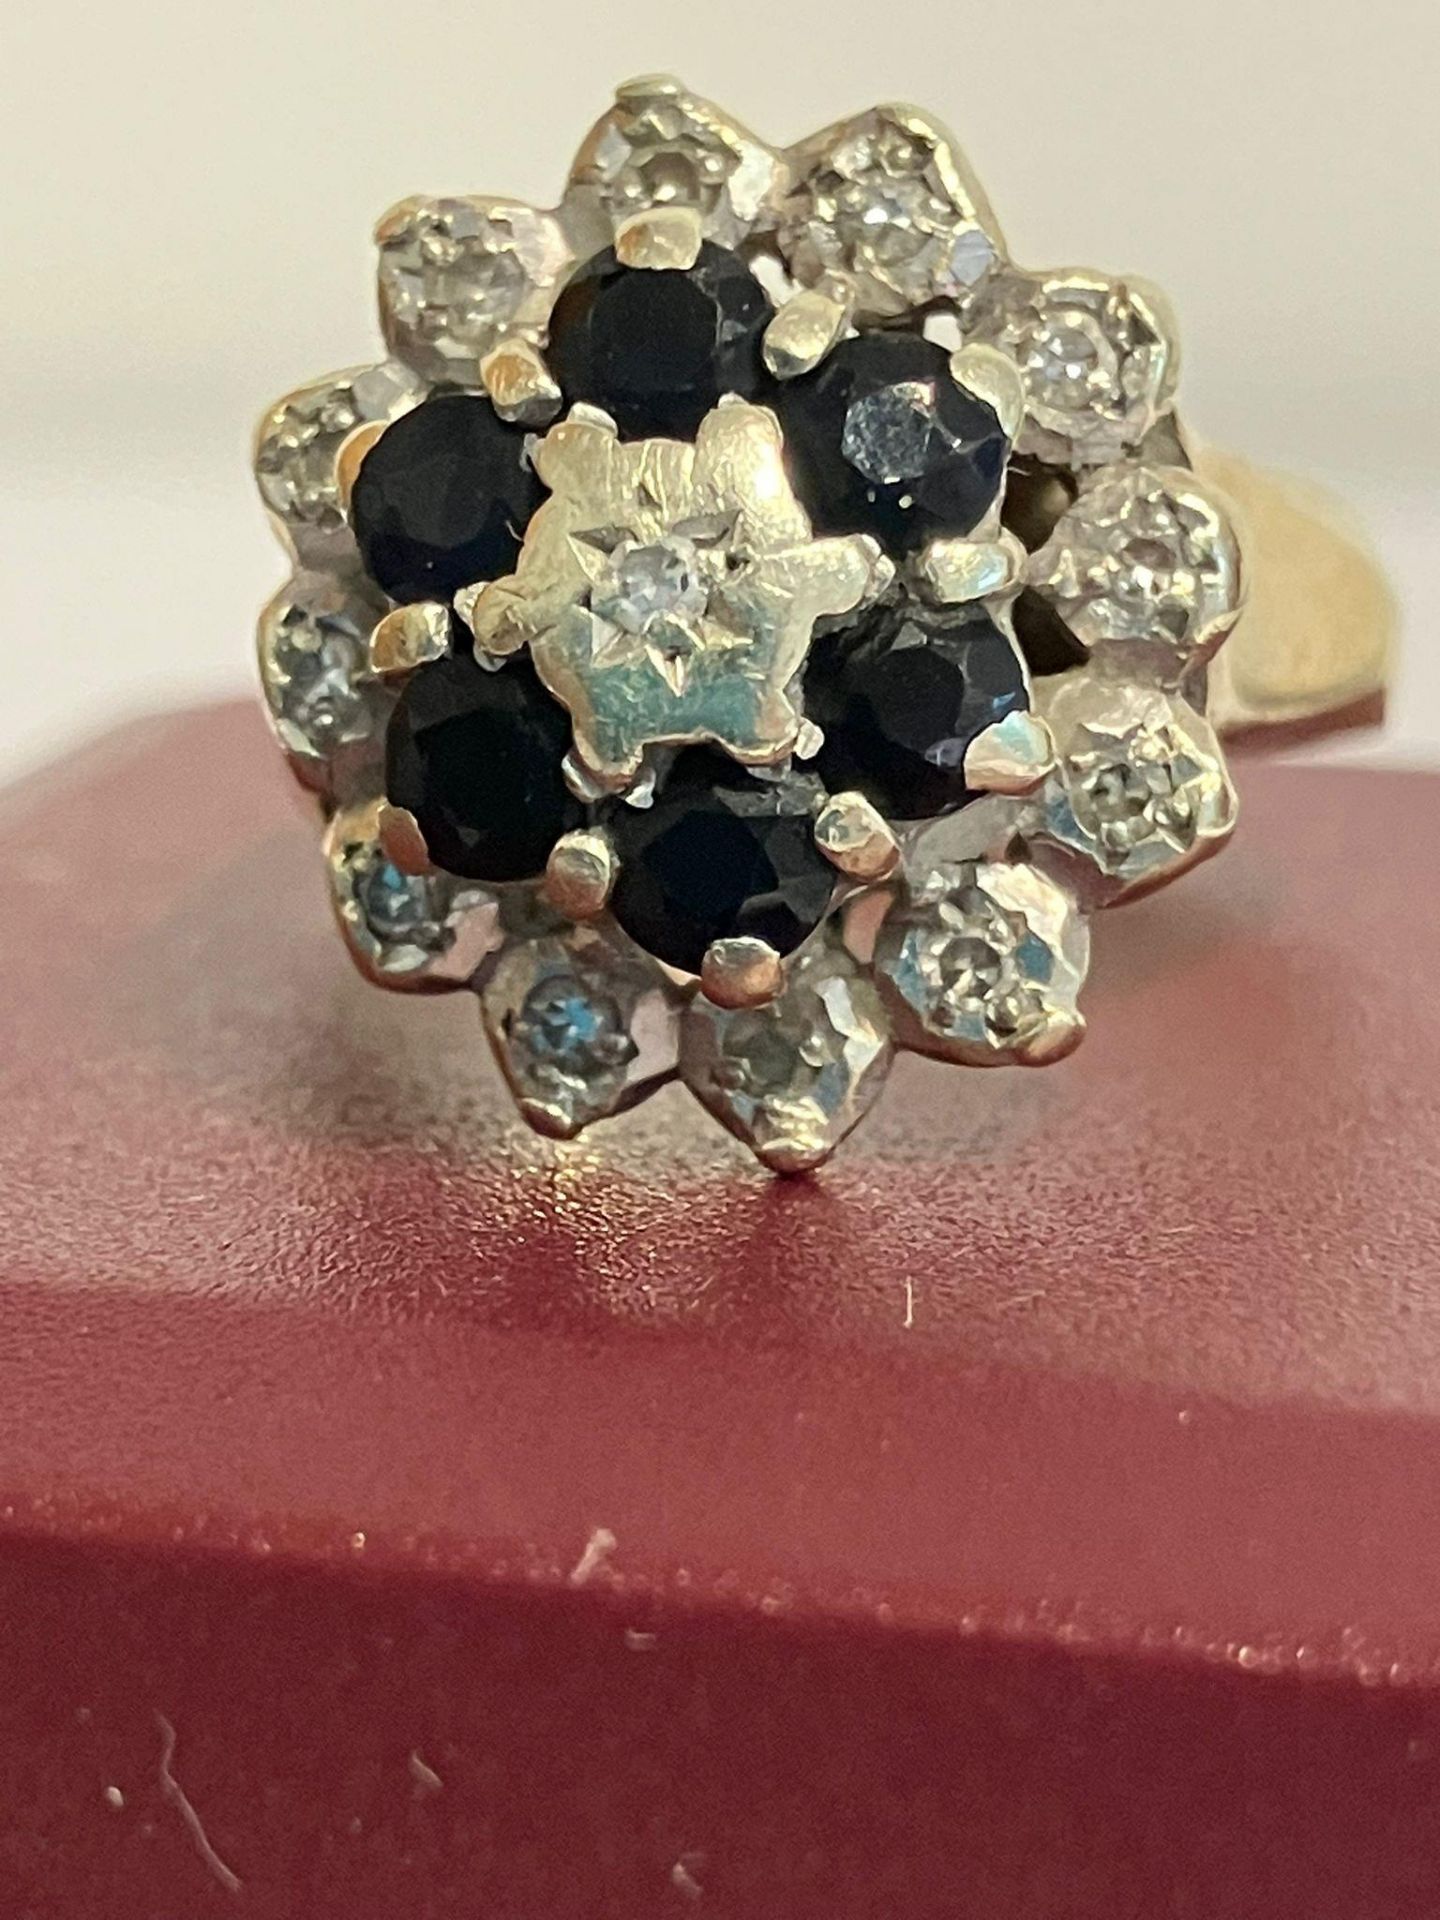 Stunning vintage 9 carat GOLD, DIAMOND and SAPPHIRE CLUSTER RING. Fully hallmarked. Presented in a